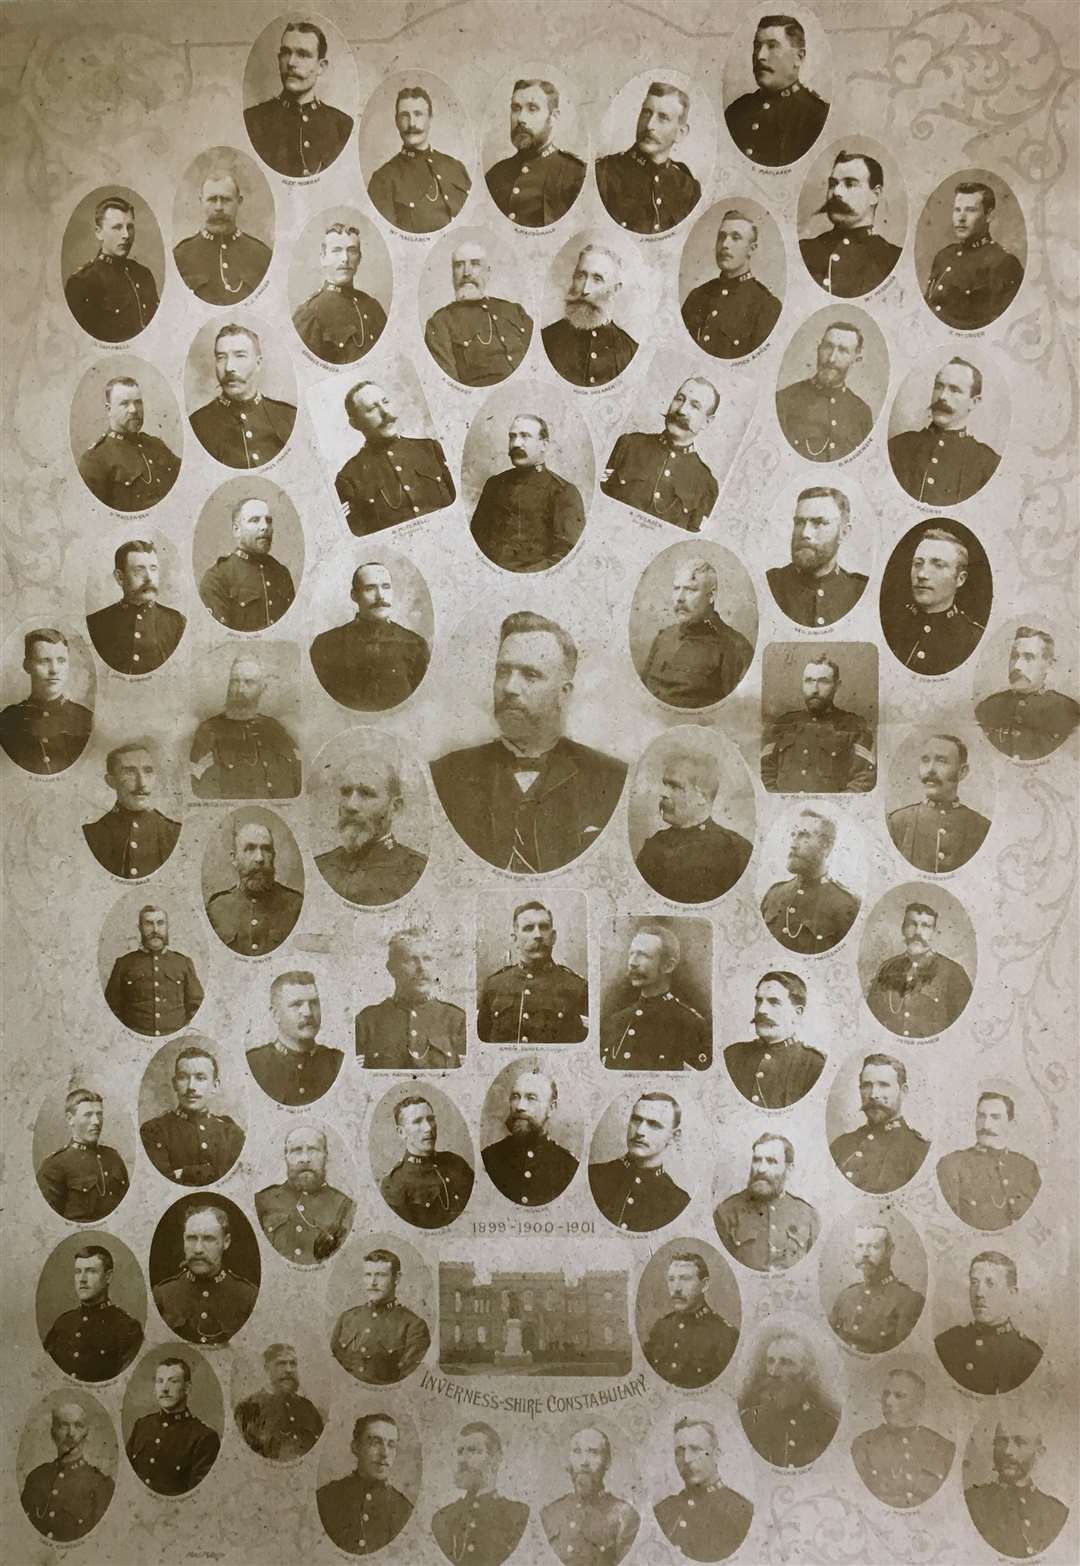 Photograph of the Inverness-shire Constabulary by MacMahon, Photo Artist, Inverness, 1899-1901.